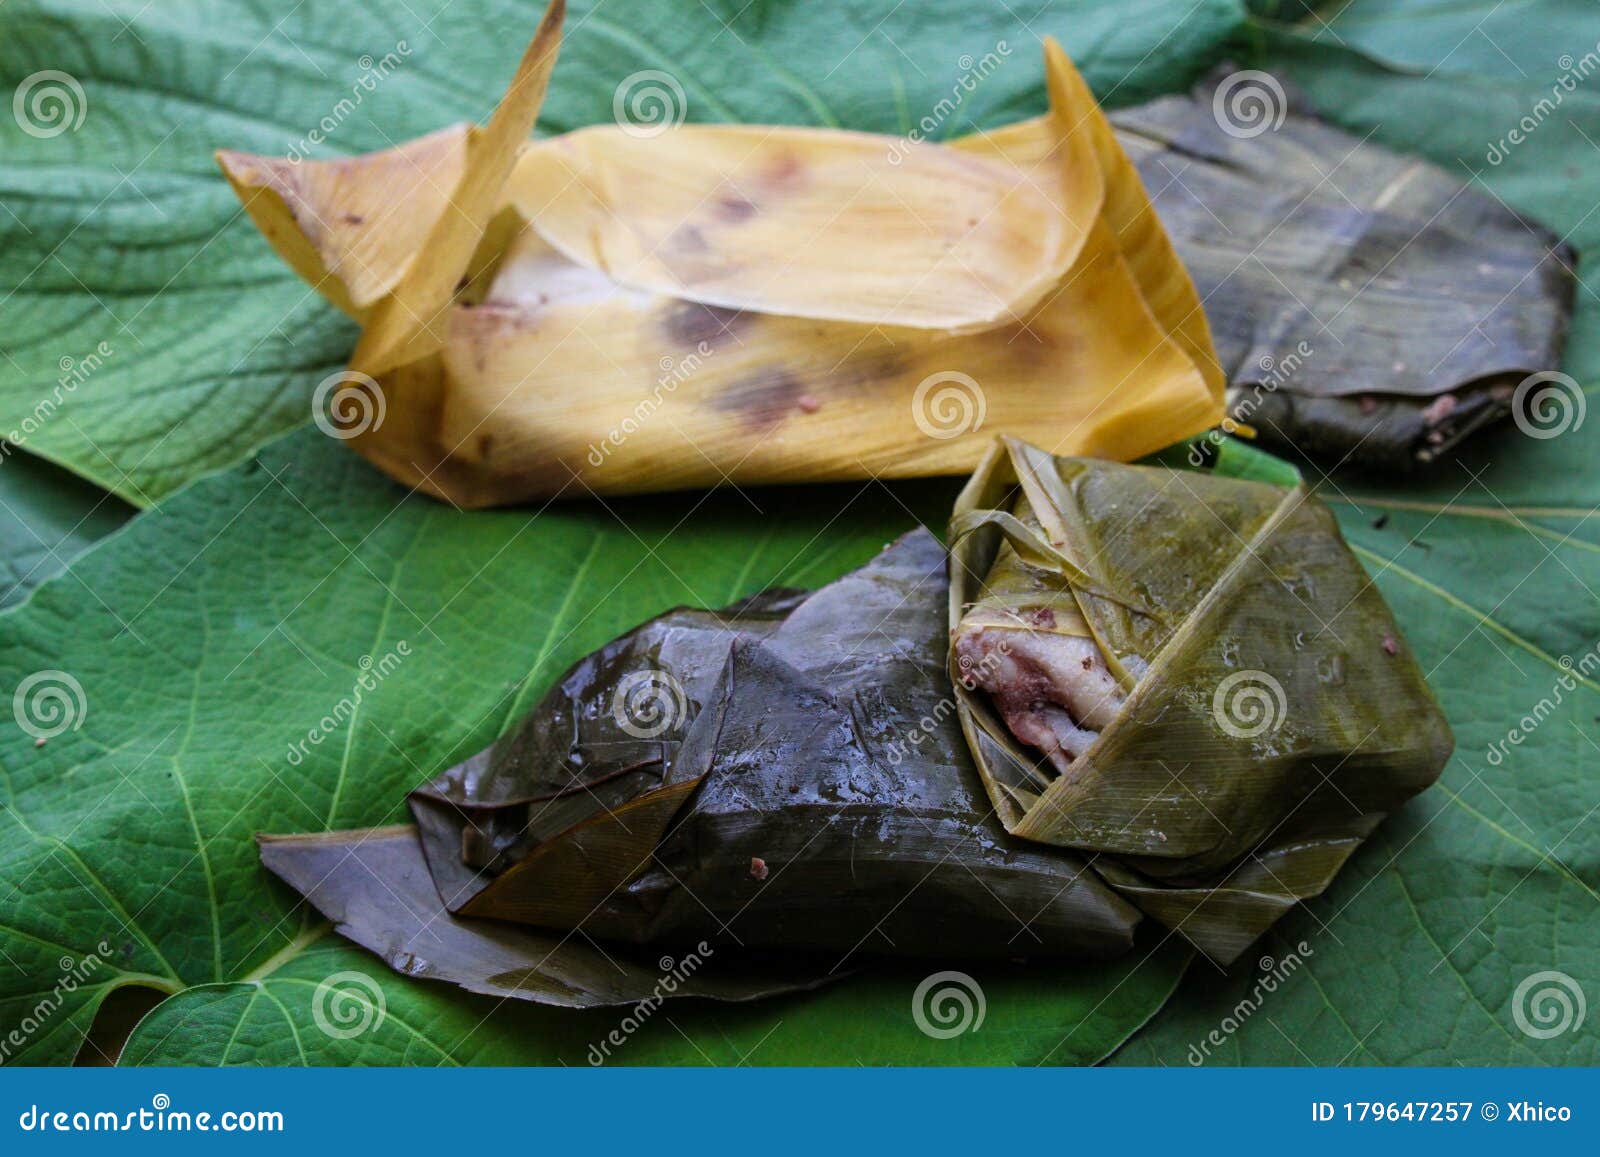 tamales made with beans wrapped in corn husks and hoja santa leaves